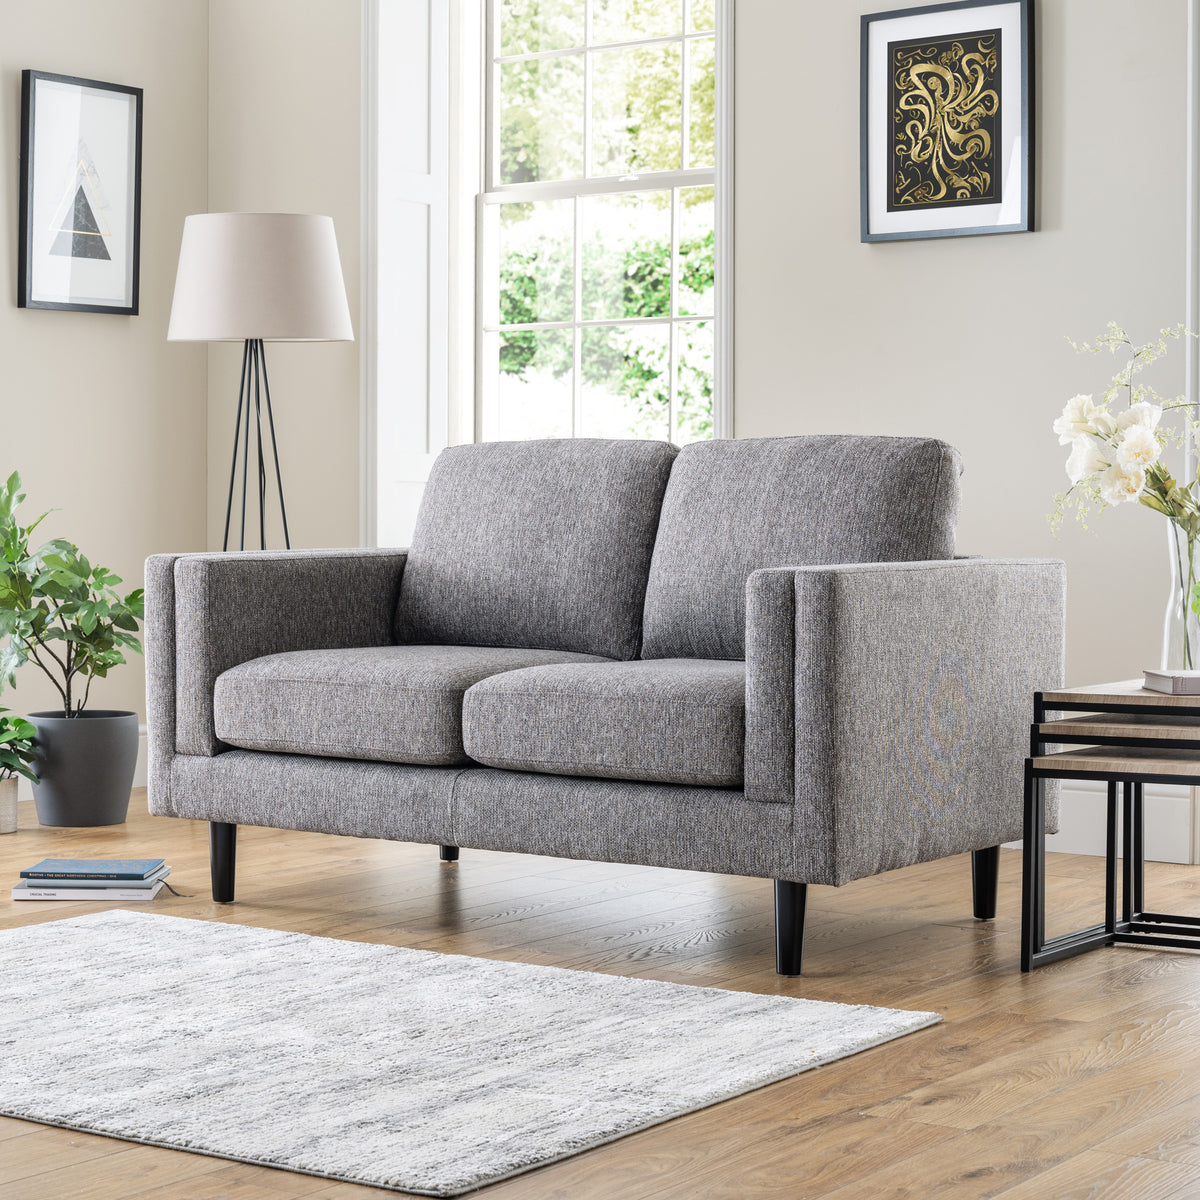 Andre 2 Seater Sofa for living room